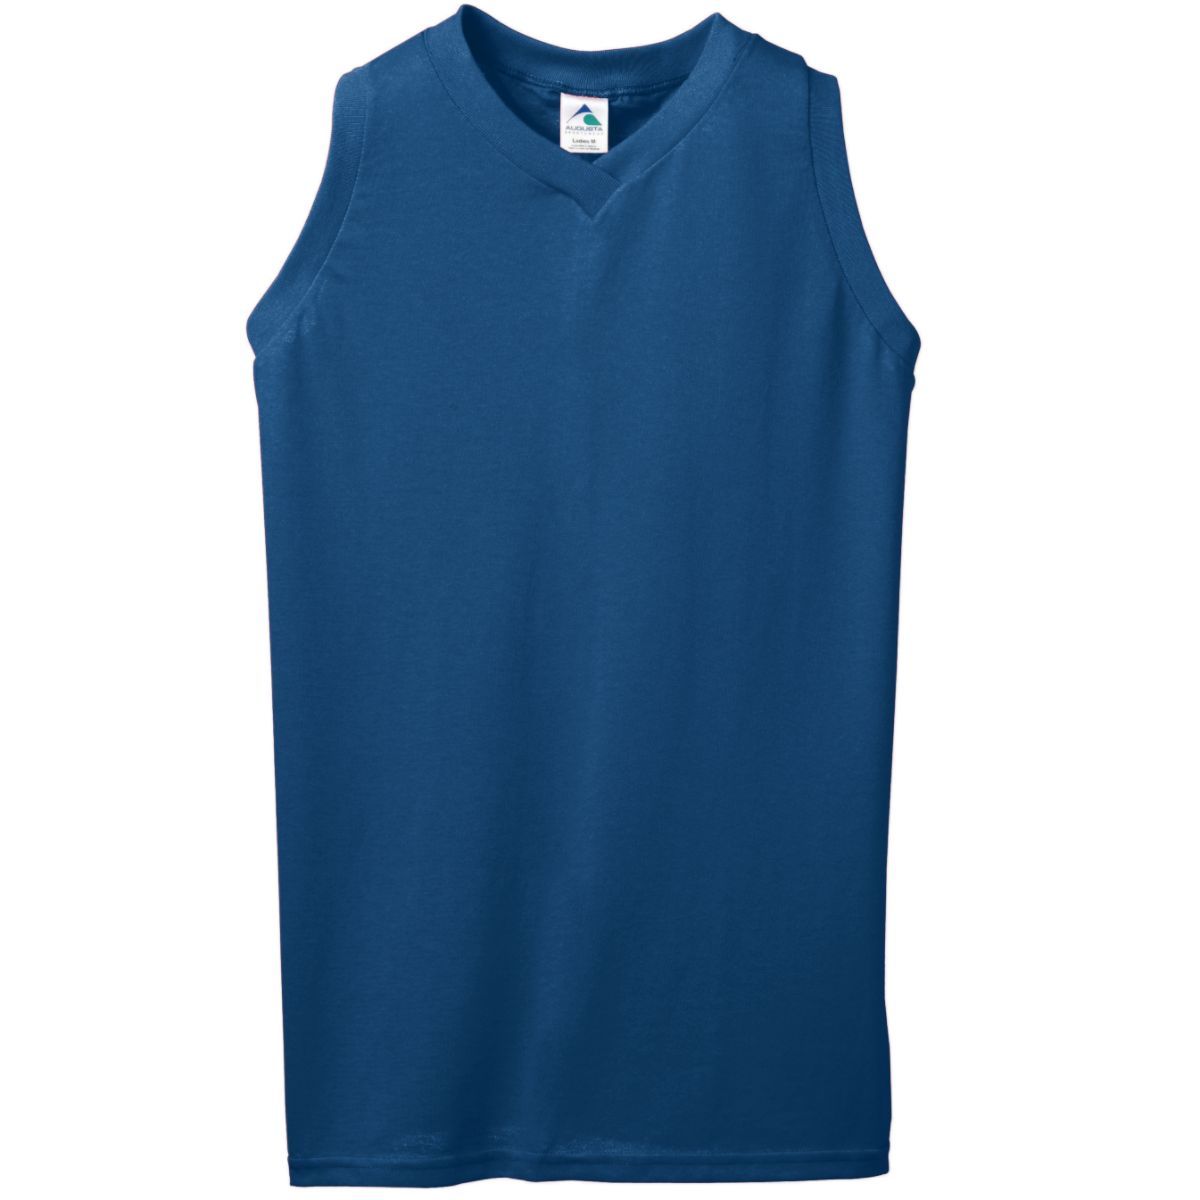 Augusta Sportswear Ladies Sleeveless V-Neck Poly/Cotton Jersey in Navy  -Part of the Ladies, Ladies-Jersey, Augusta-Products, Tennis, Shirts product lines at KanaleyCreations.com